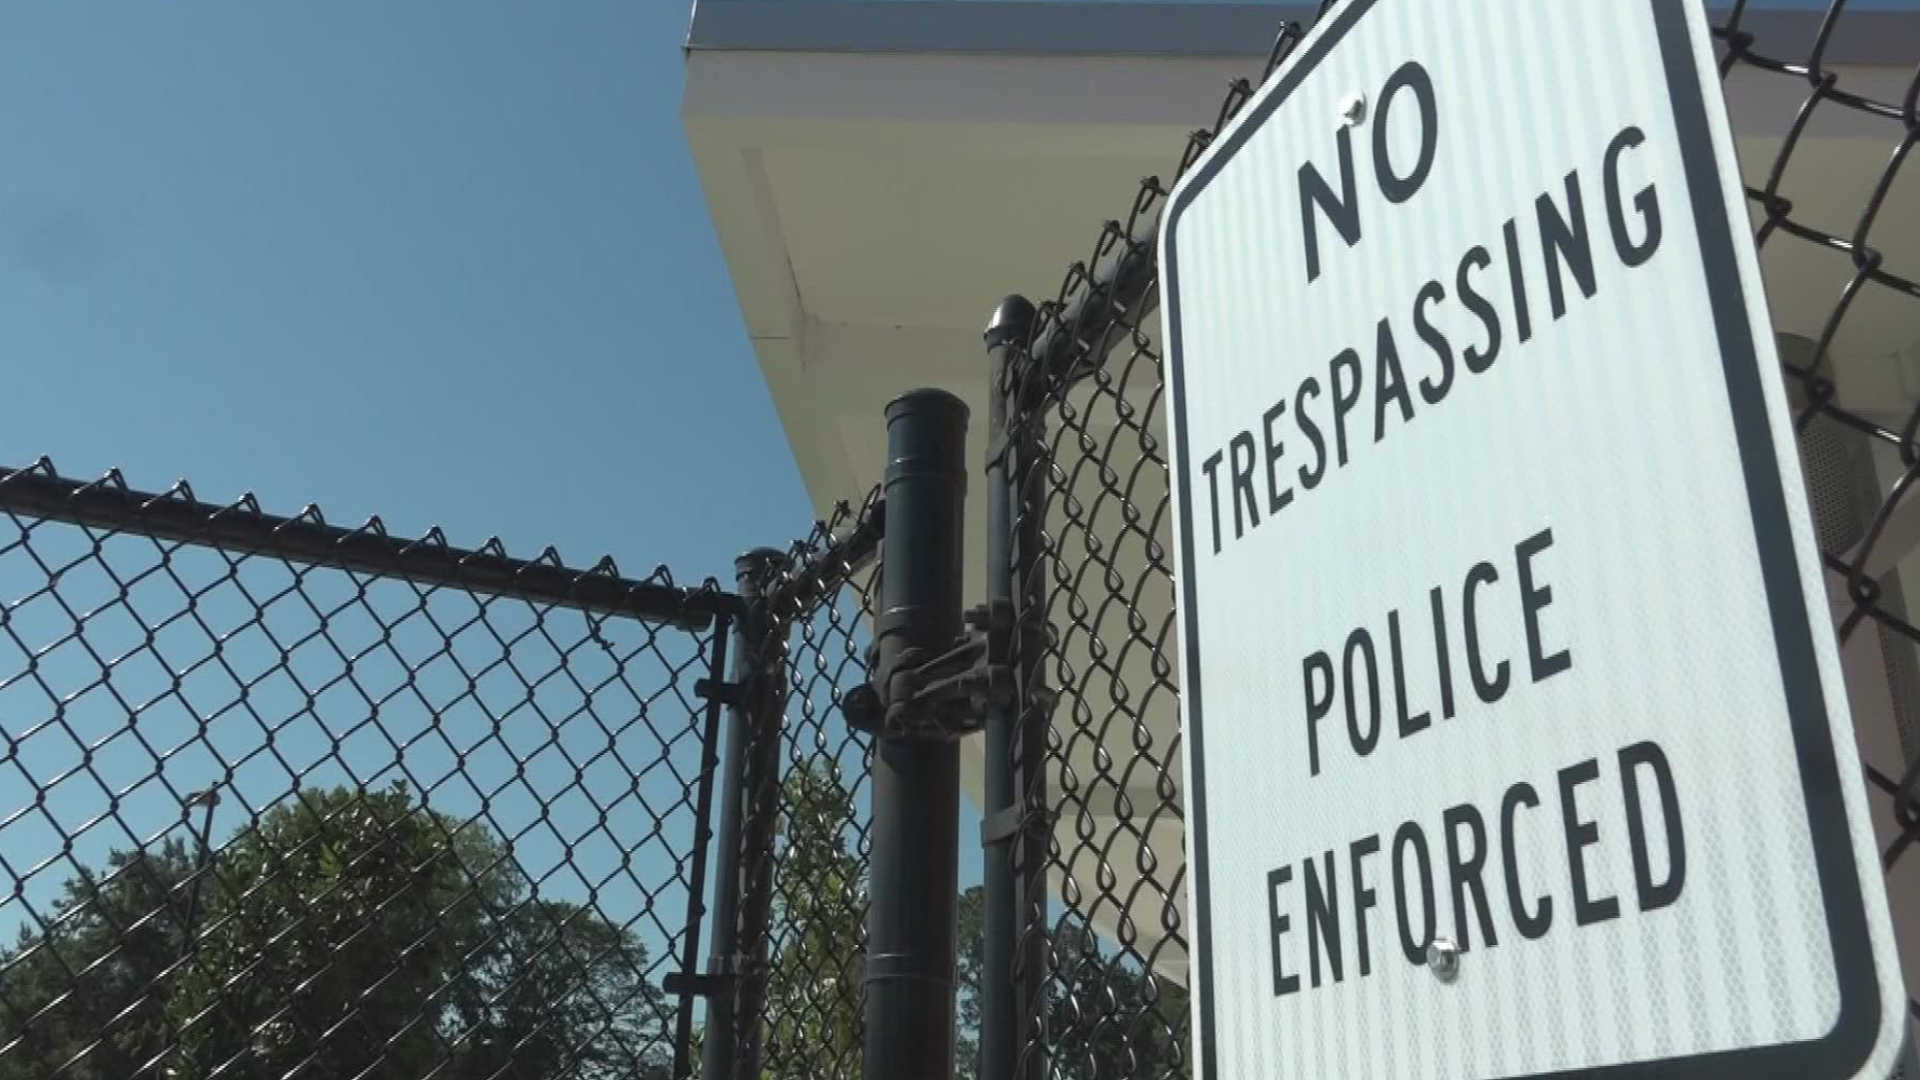 When it comes to police and firefighters accessing school buildings, there’s a new law in Virginia that makes sure they know where they’re going.